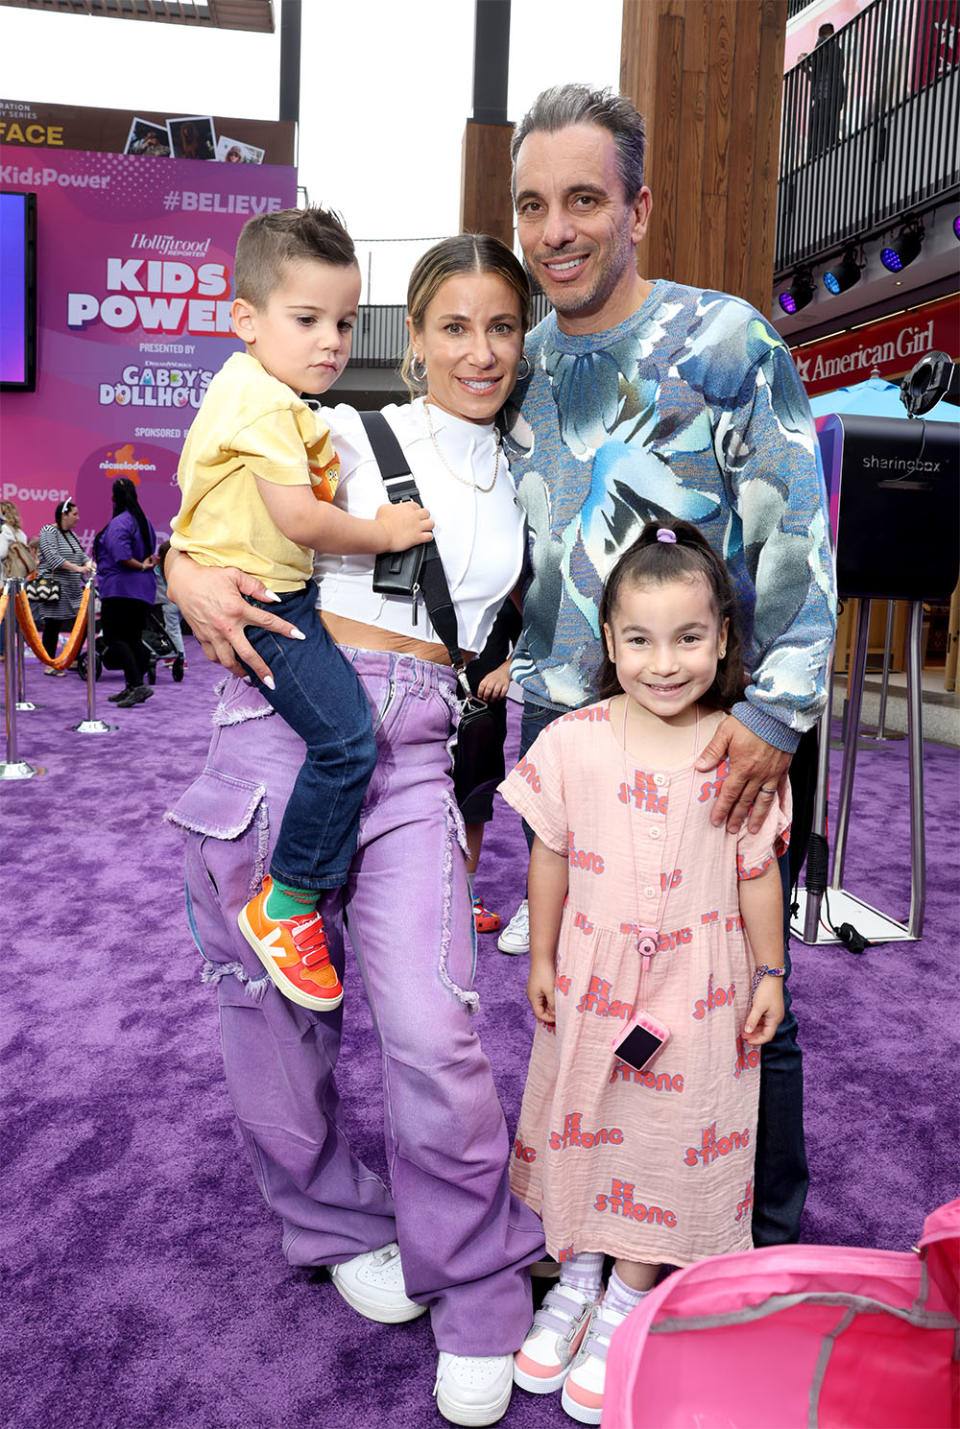 Sebastian Maniscalco (R) and guests attend The Hollywood Reporter Kids! Power Celebration on June 10, 2023 at Westfield Century City in Los Angeles, California.